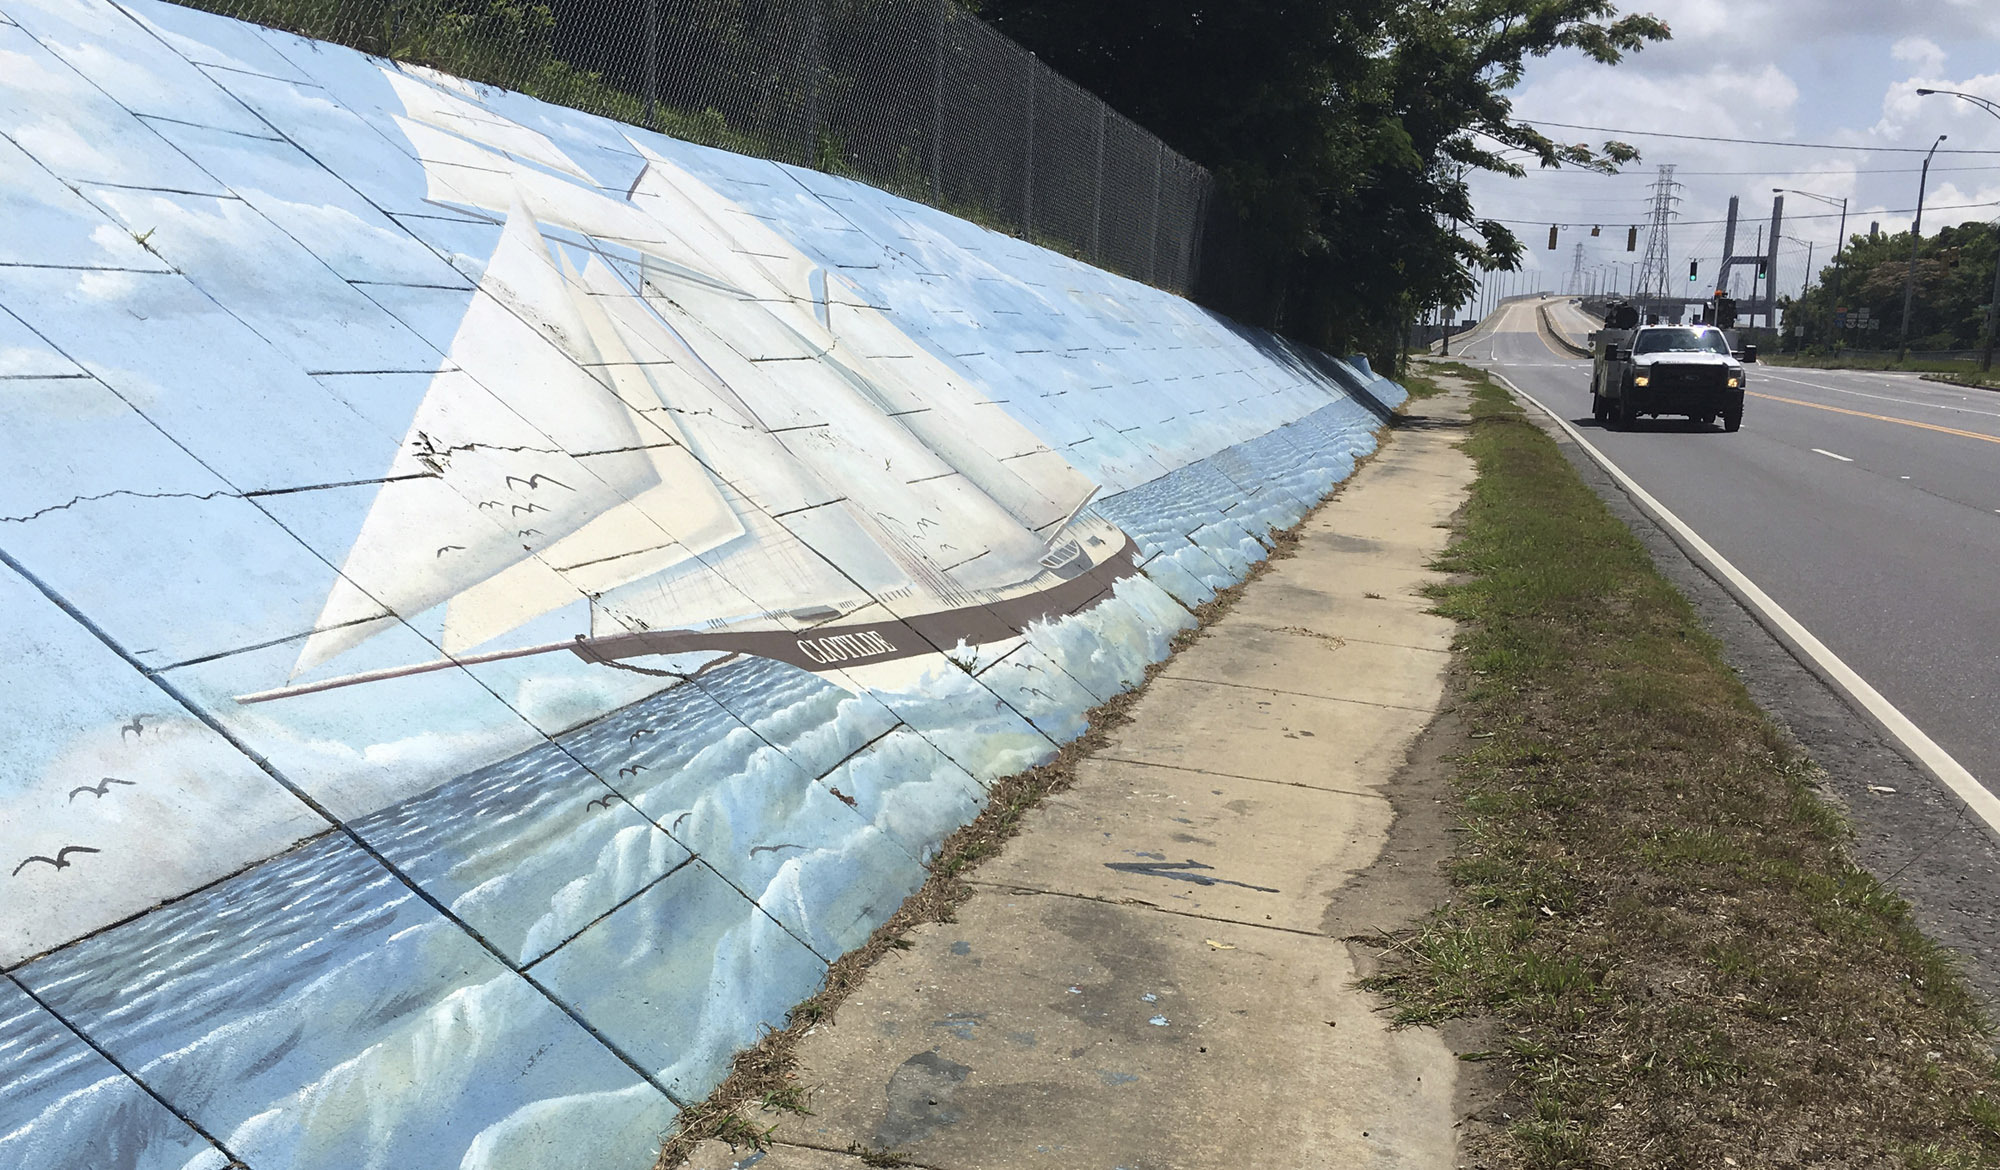 FILE - Traffic passes a mural of the slave ship Clotilda along Africatown Boulevard, in Mobile, Ala., May 30, 2019. Researchers are returning to the Alabama coast near Mobile in May 2022 to assess the sunken remains of the Clotilda, which was the last slave ship to bring captive Africans to the United States more than 160 years earlier. (AP Photo/Kevin McGill, File)